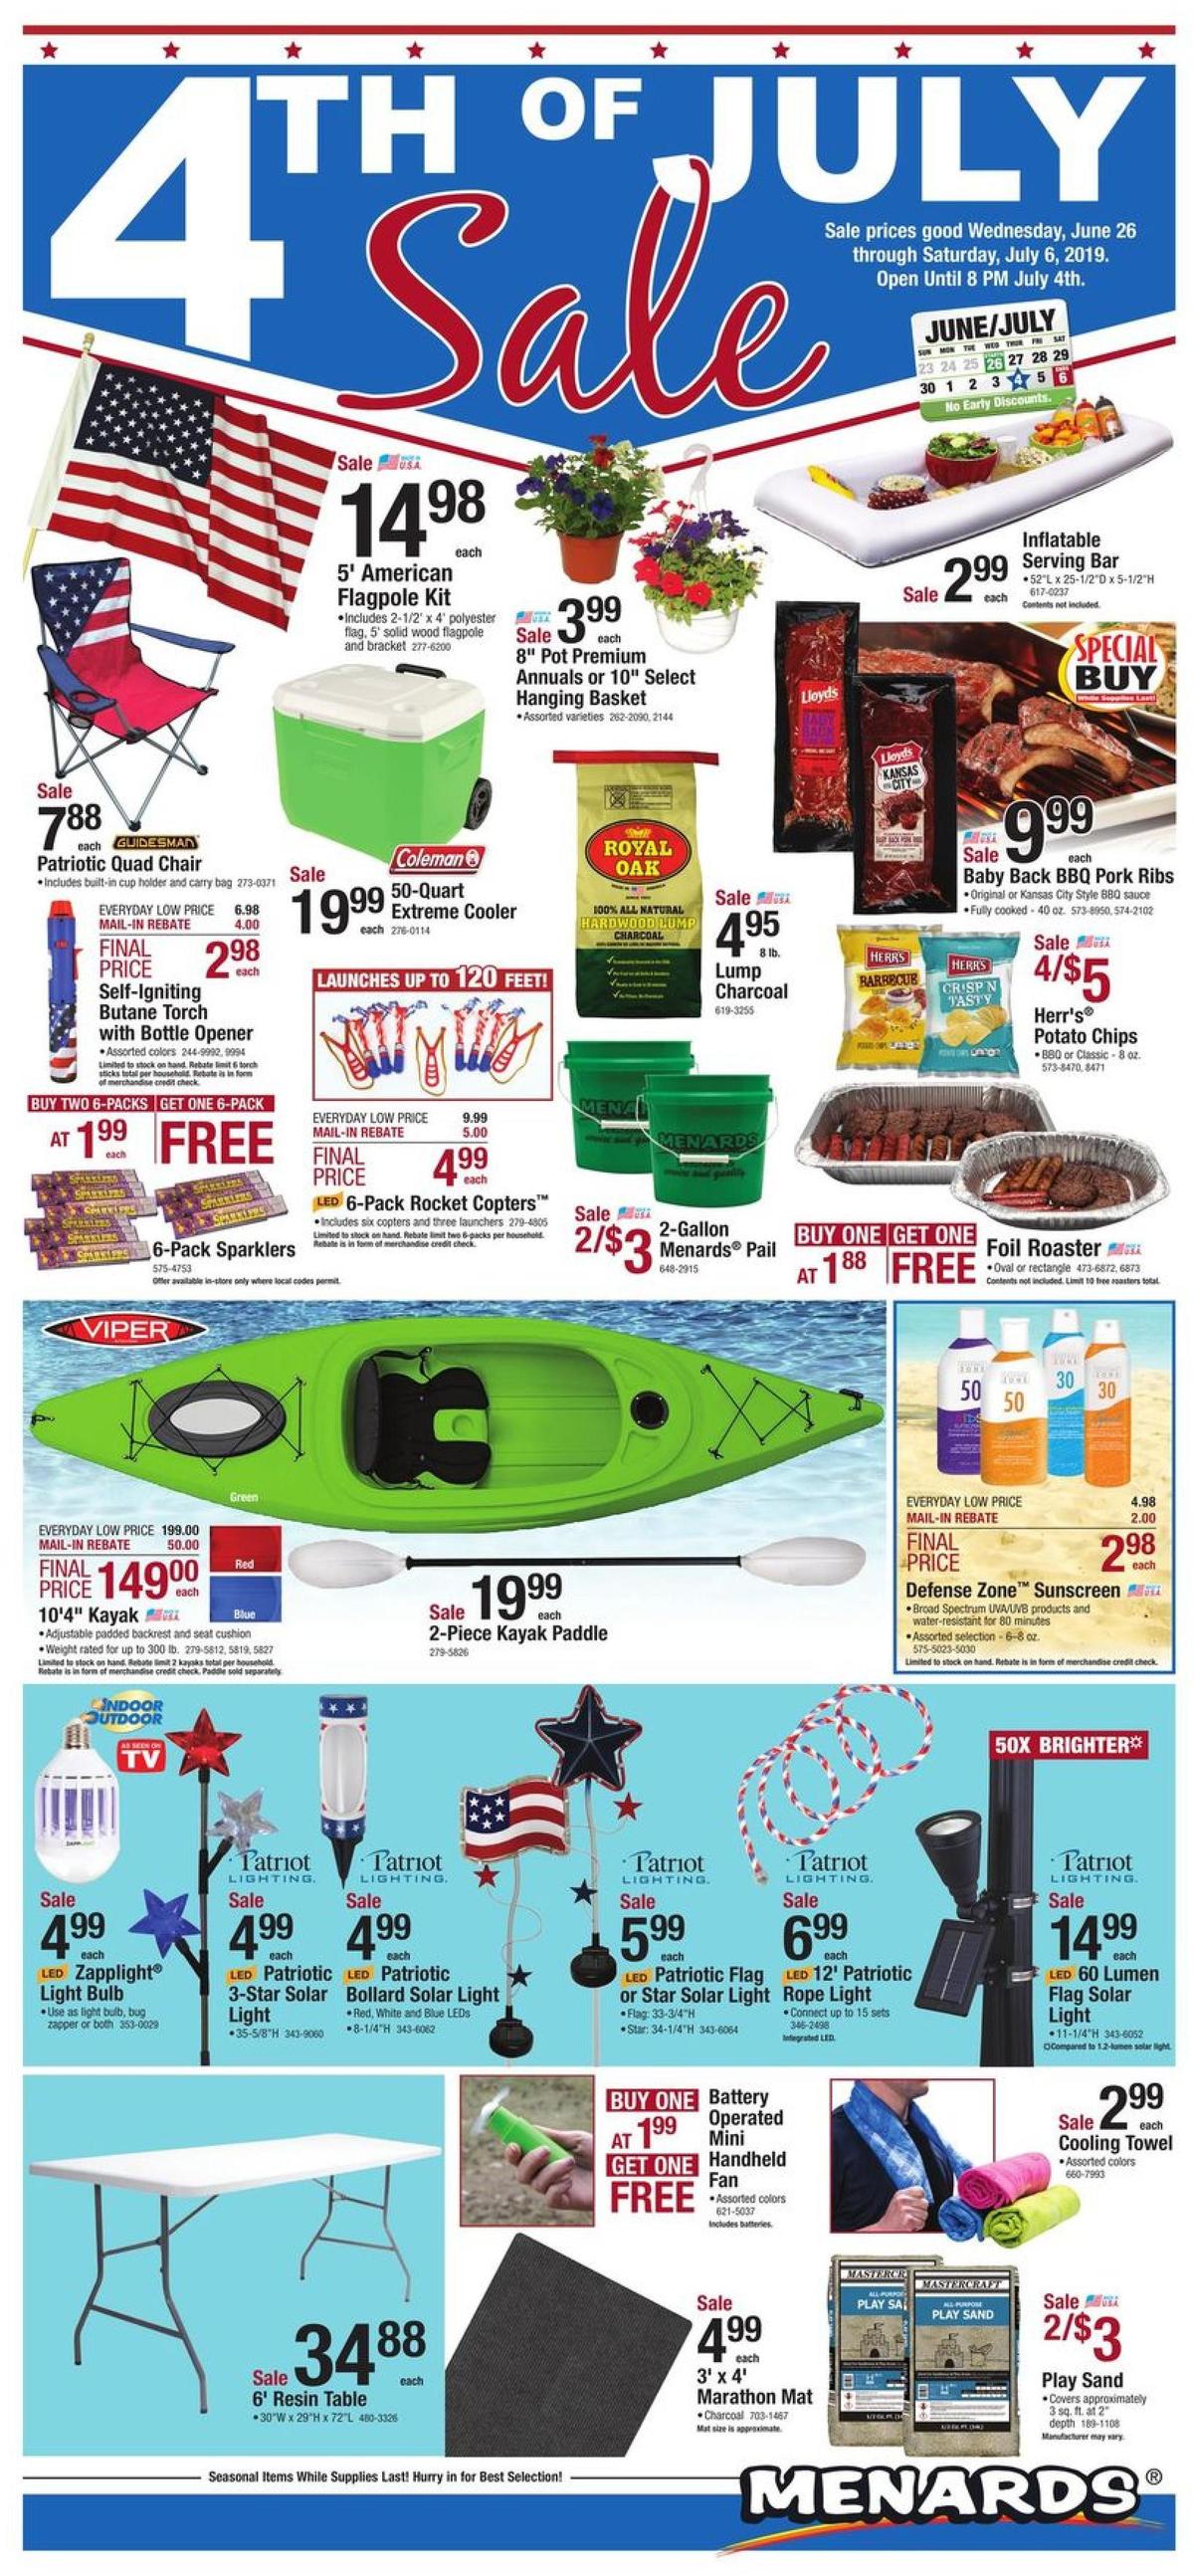 Menards 4th of July Sale Outdoor Gear Weekly Ads & Special Buys from